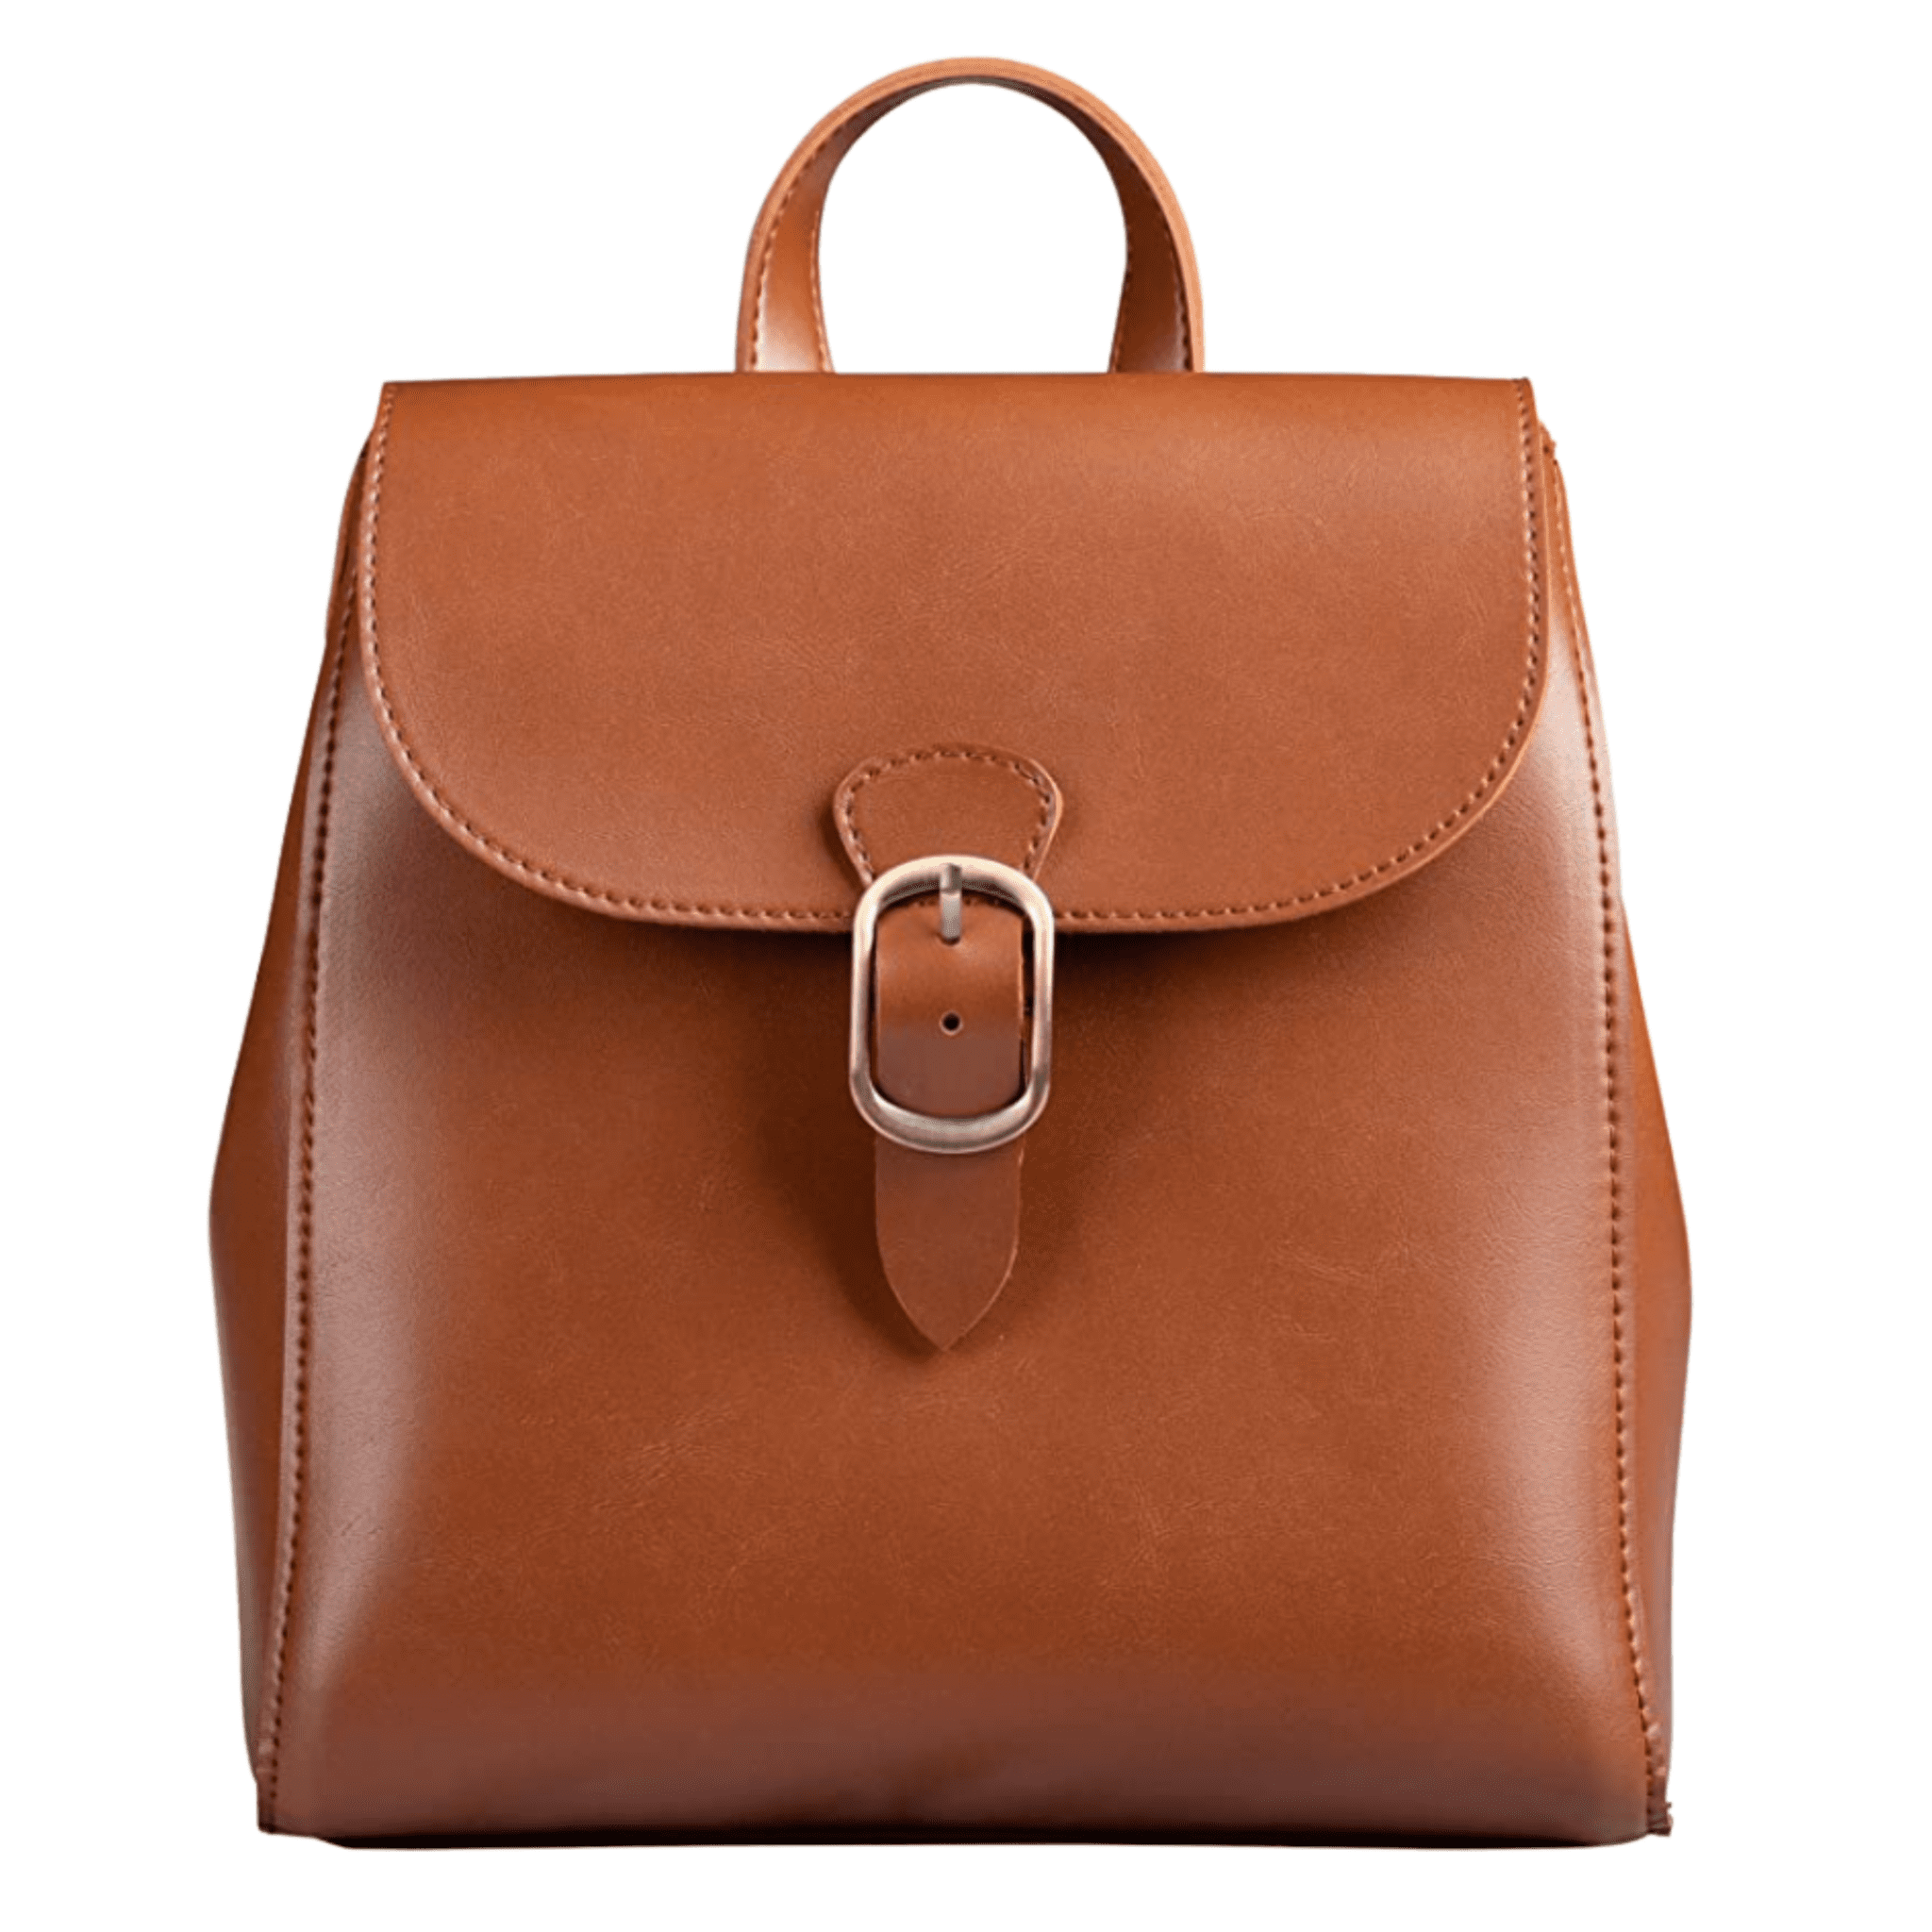 Tan backpack with single handle and gold buckle closure.